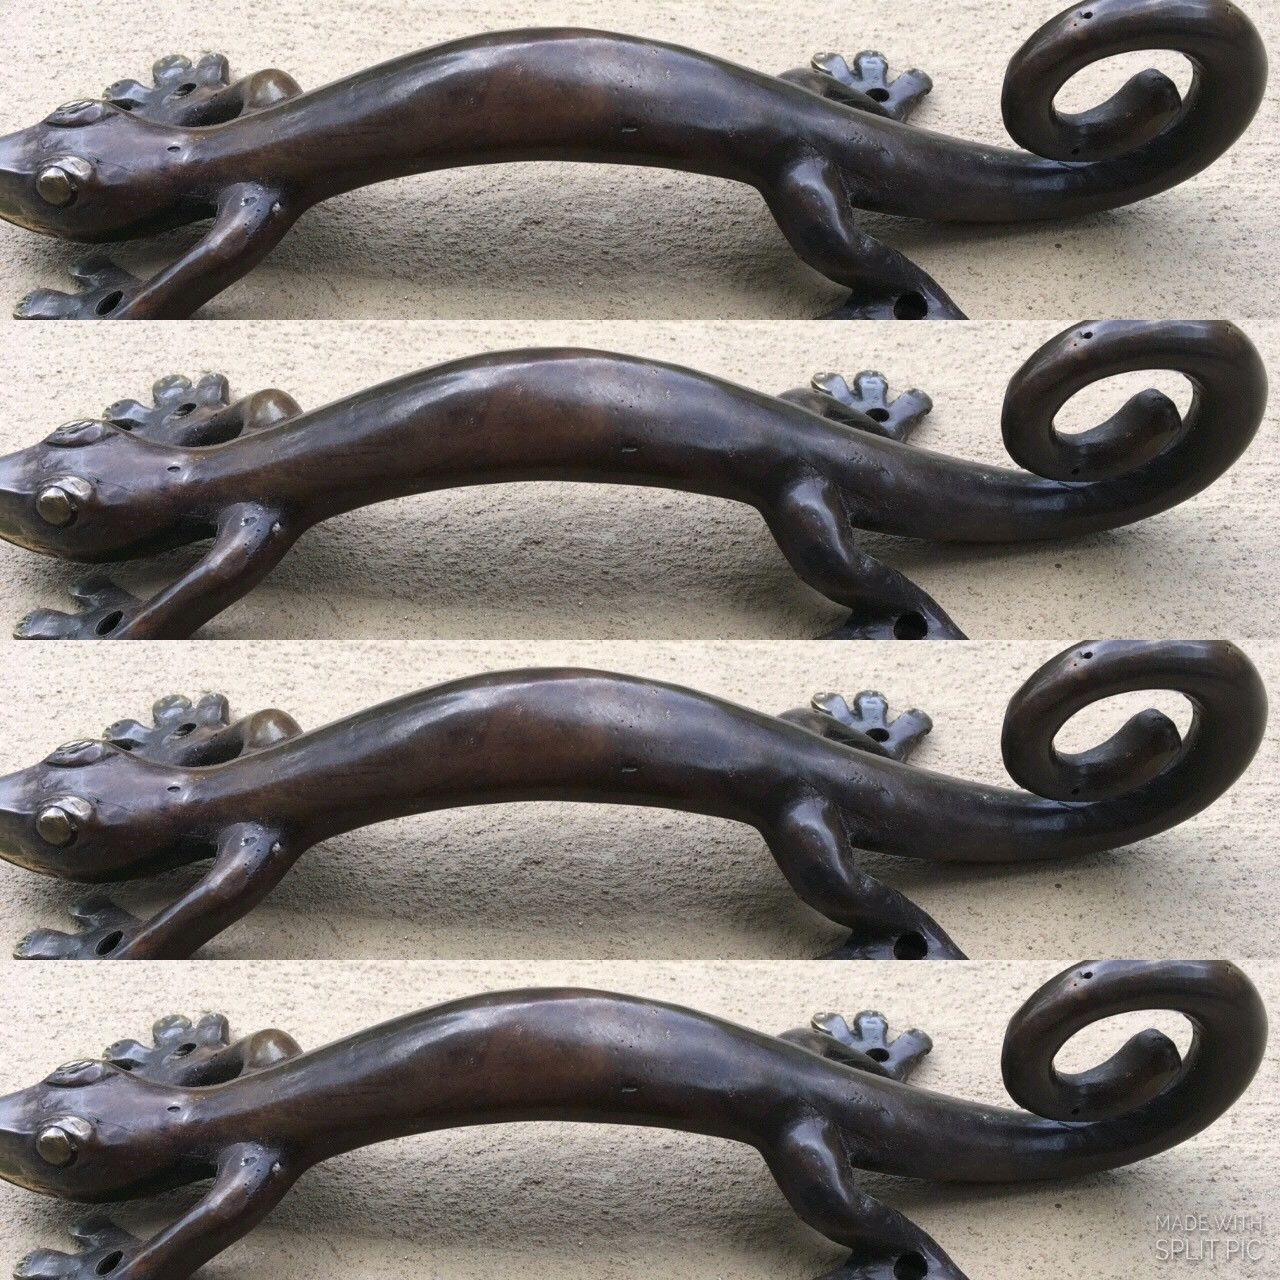 2 small GECKO DOOR PULLS 21cm aged brass scales old style house handle 8.1/2" B 